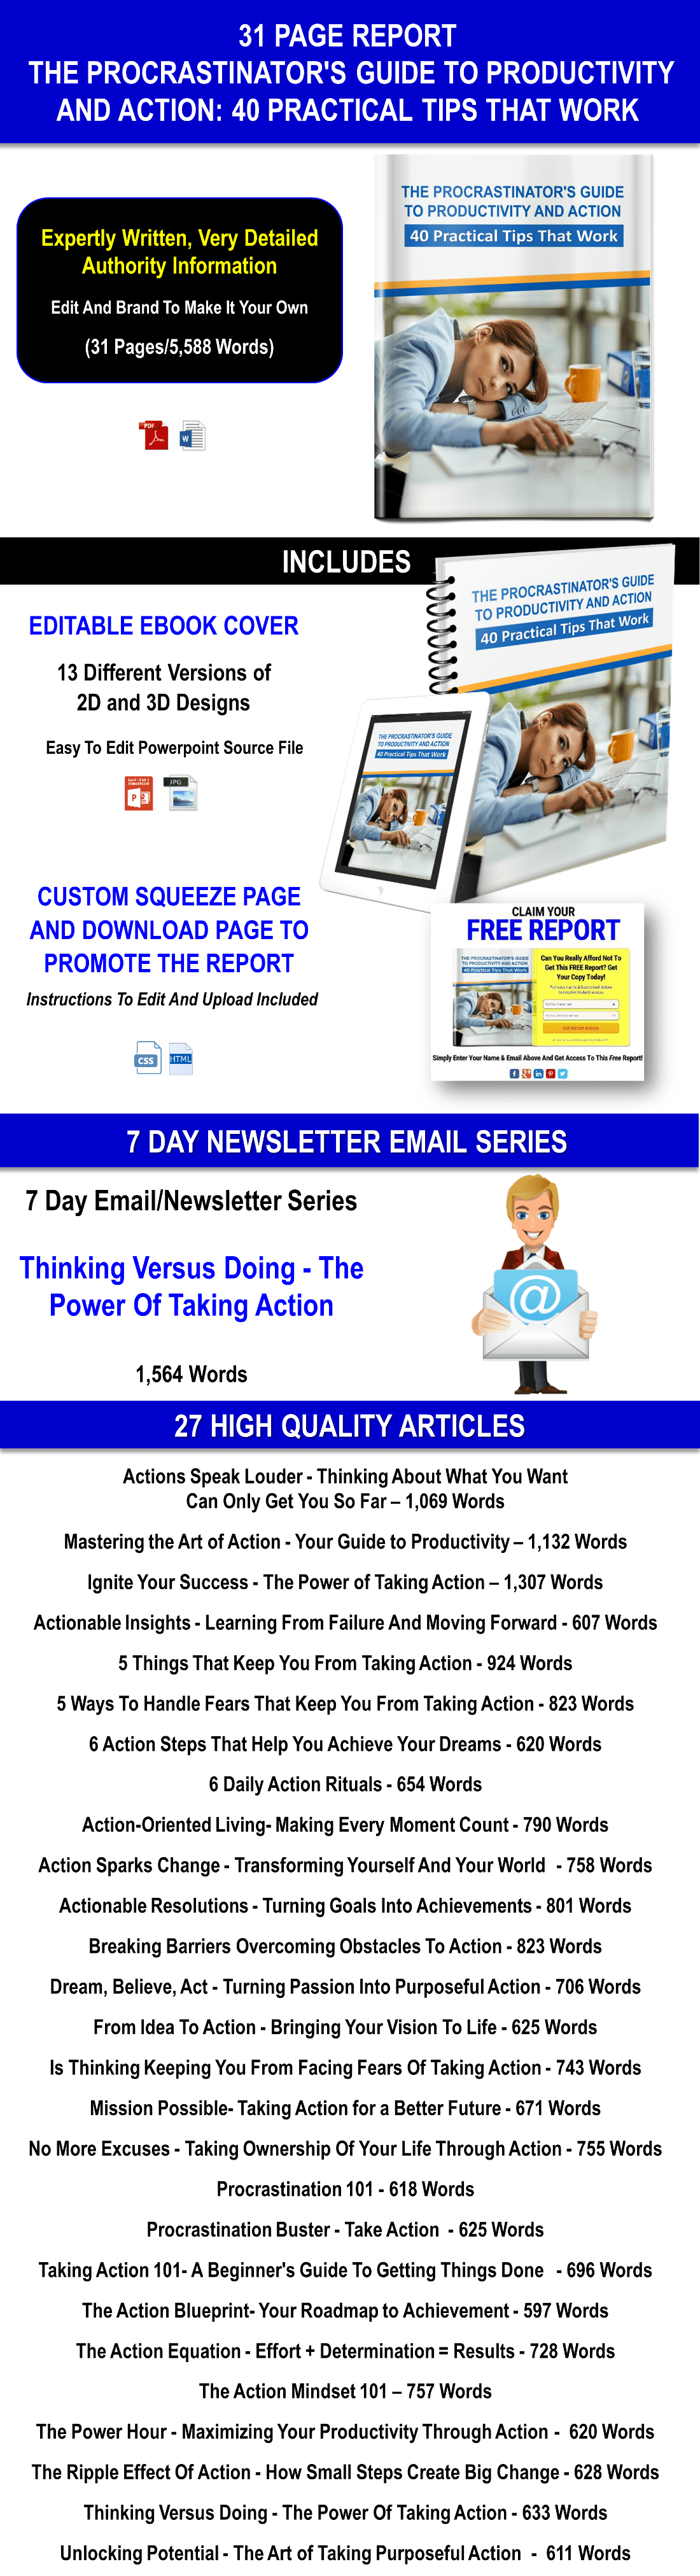 Mission Possible: Thinking Versus Doing – The Power Of Taking Action Content Pack with PLR Rights